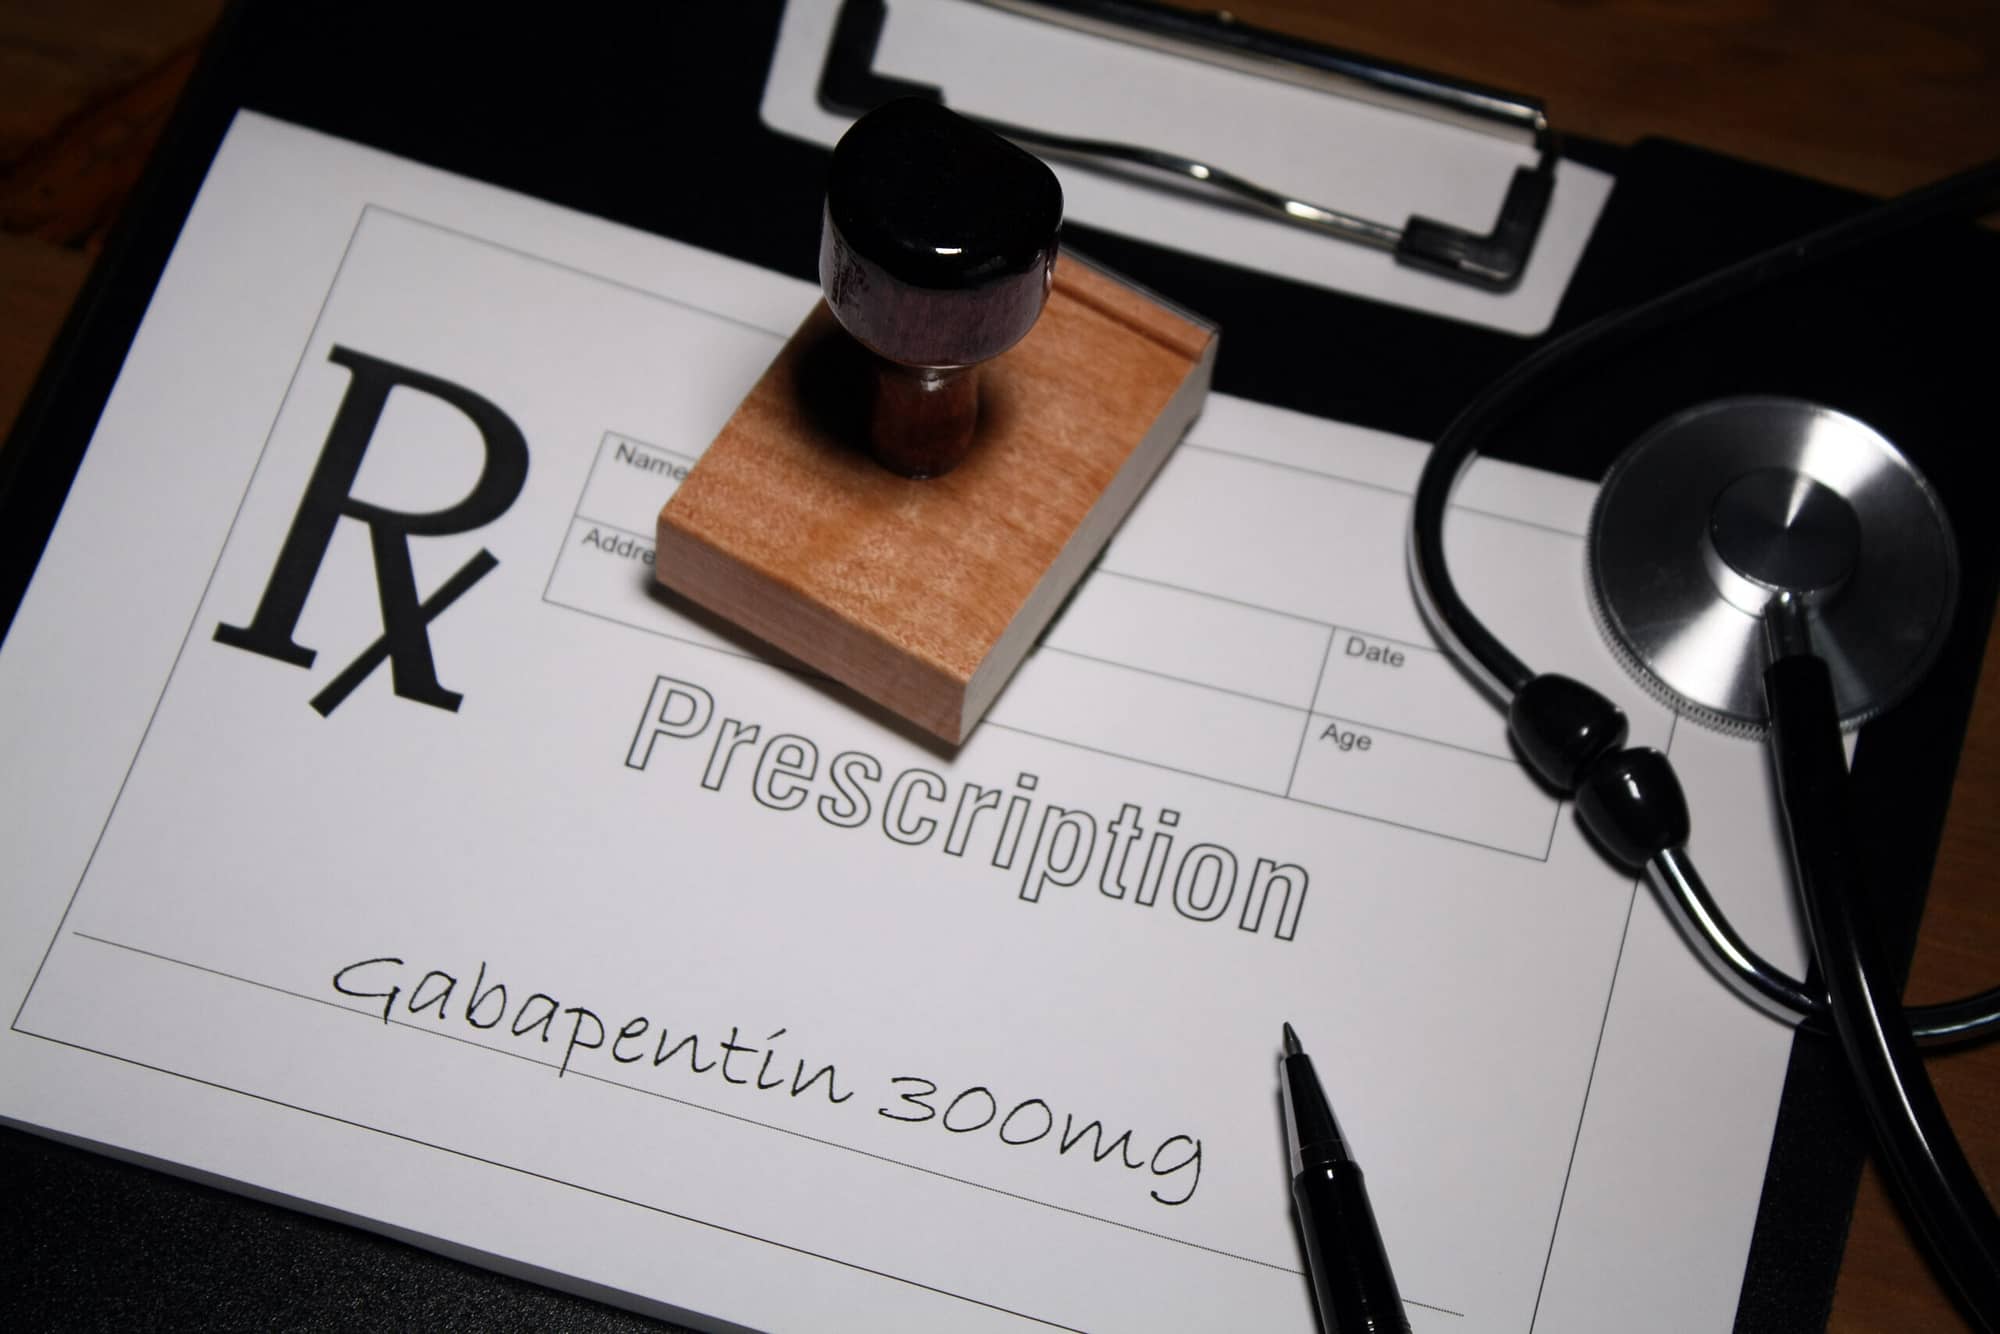 Gabapentin can be prescribed by a doctor or medical professional.